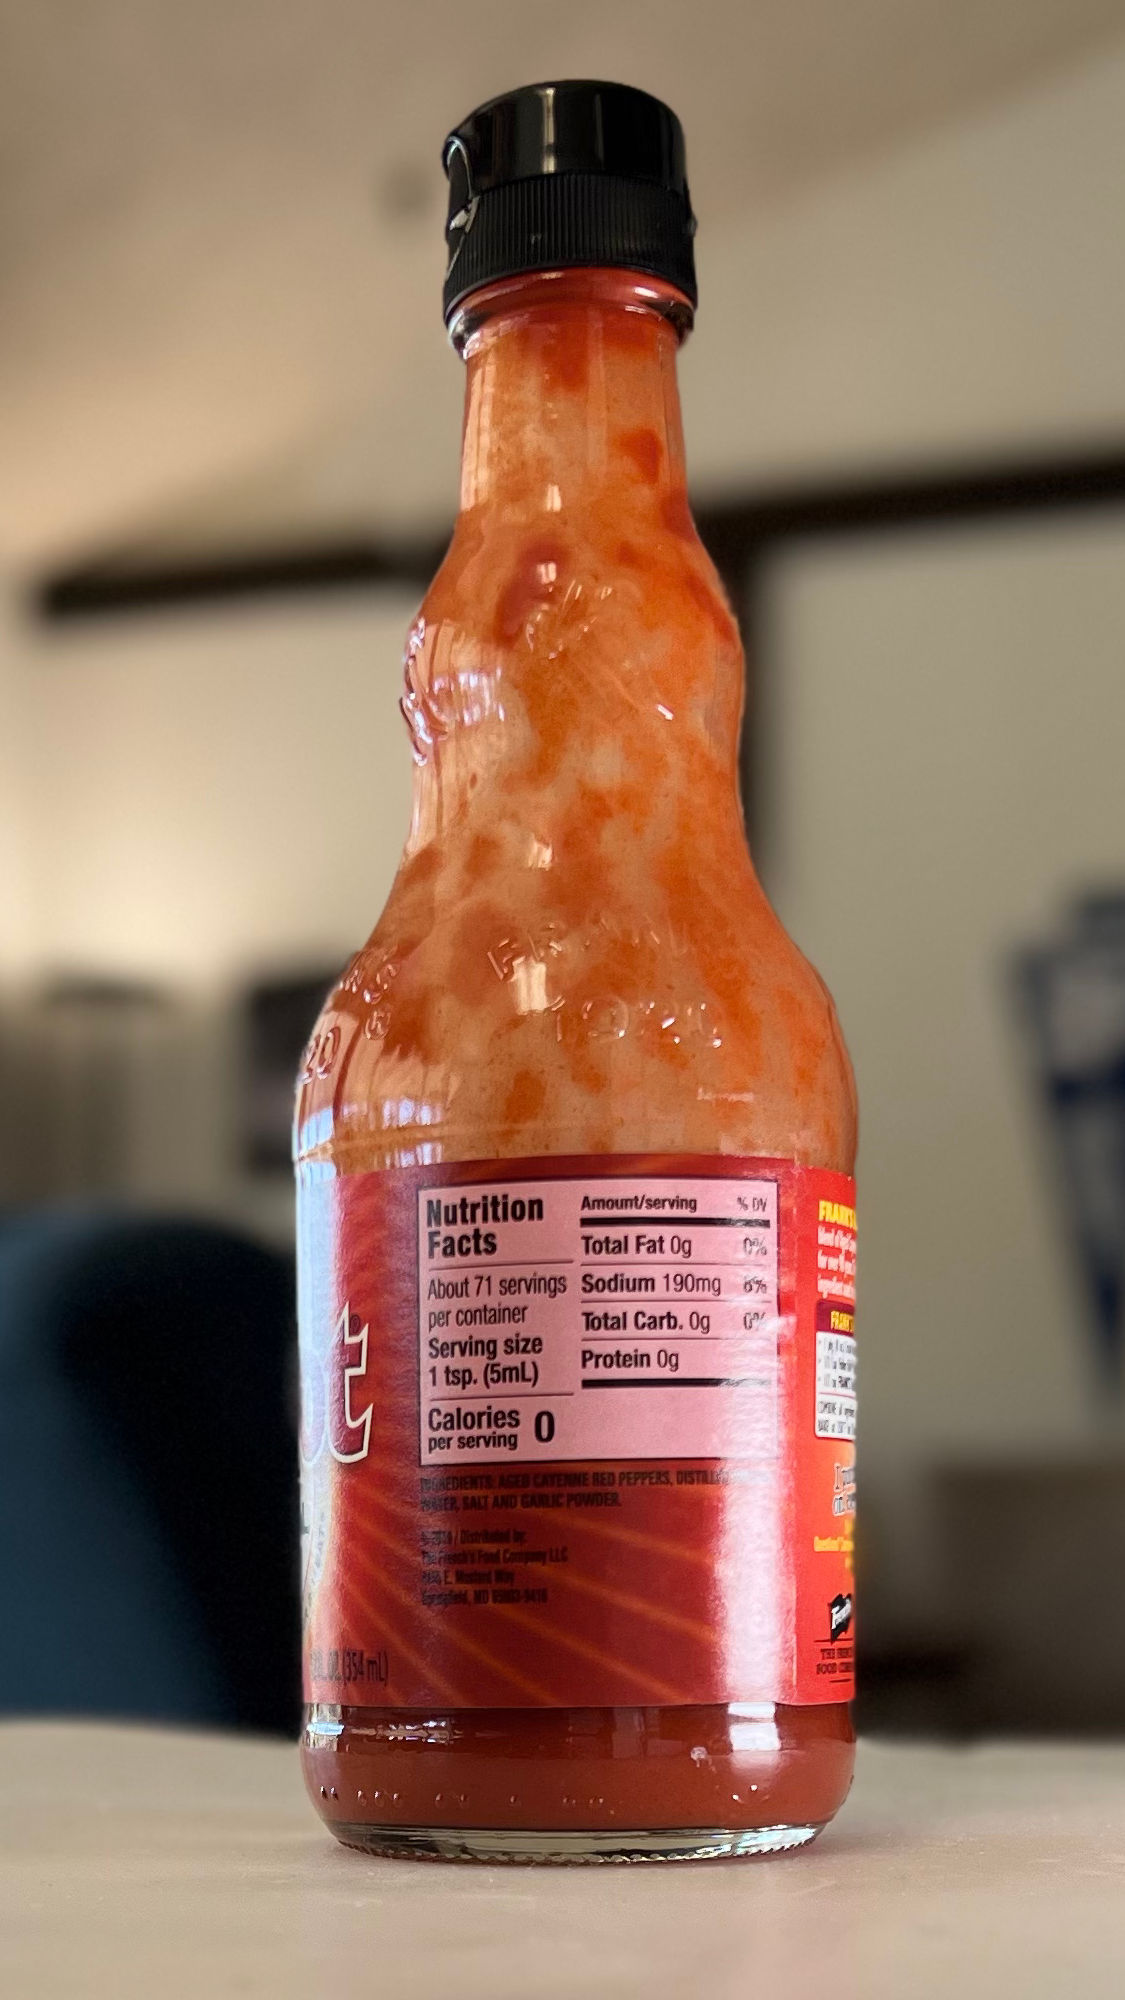 Frank's RedHot Nutrition Facts